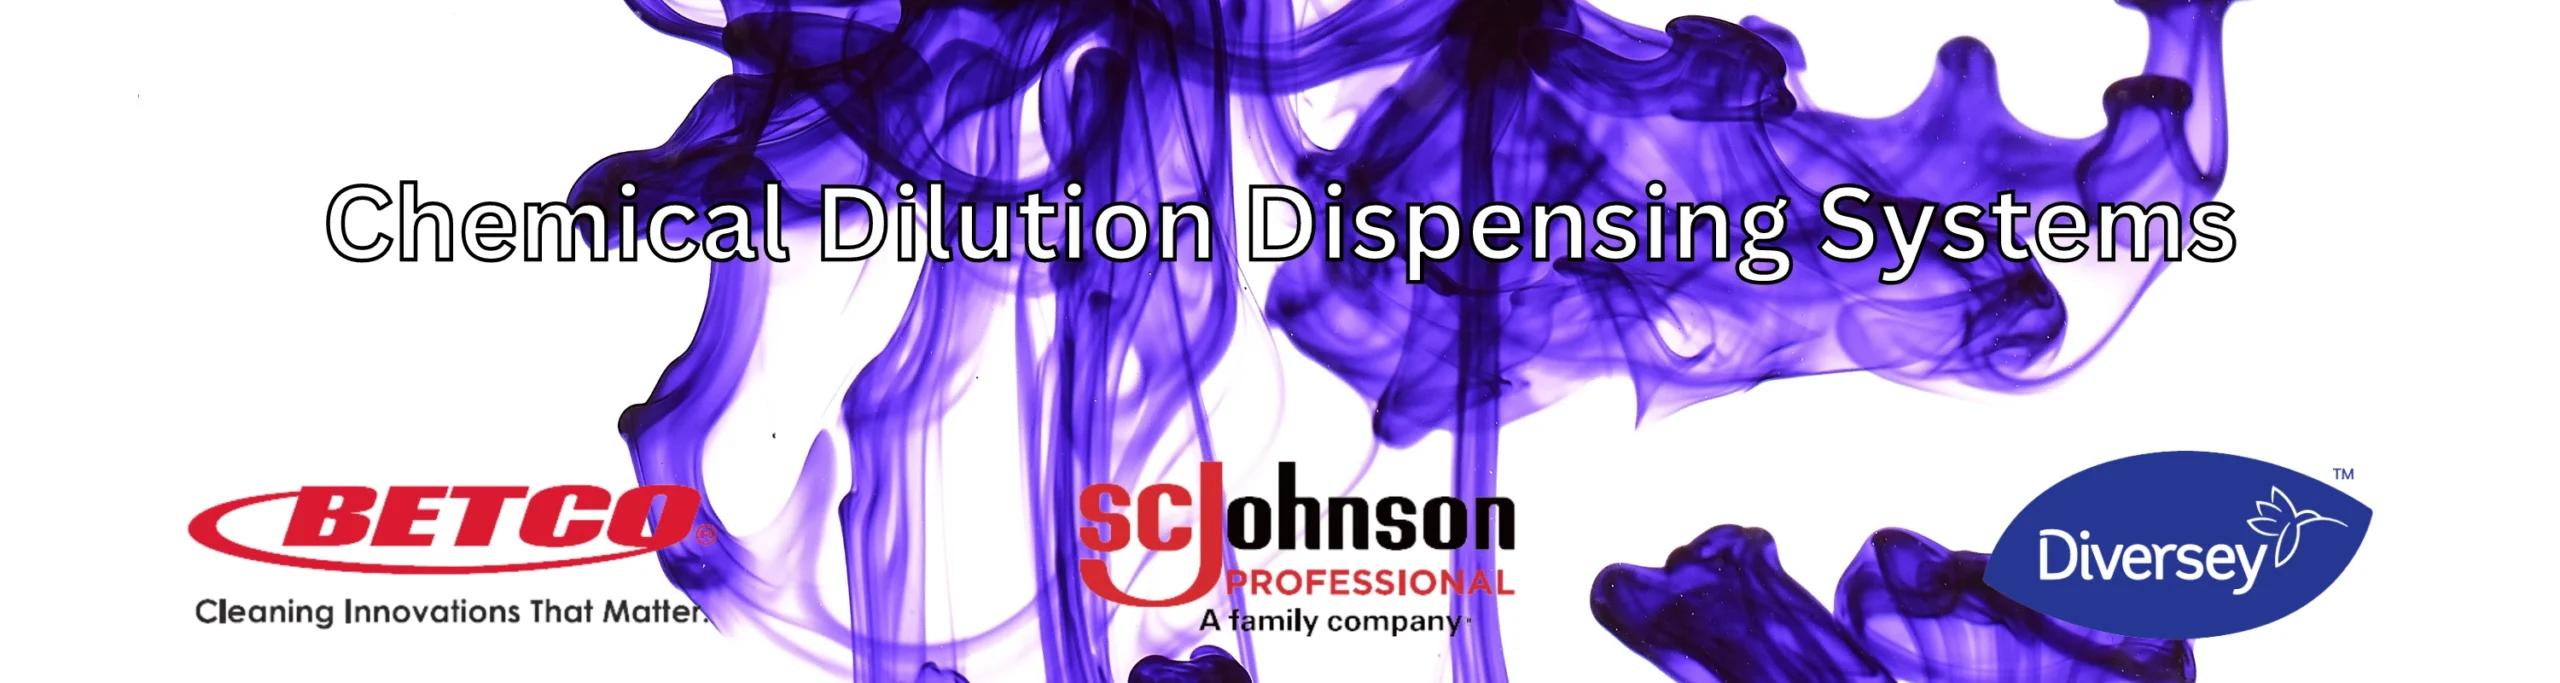 Chemical Dilution Dispensing Systems Blog Banner Image